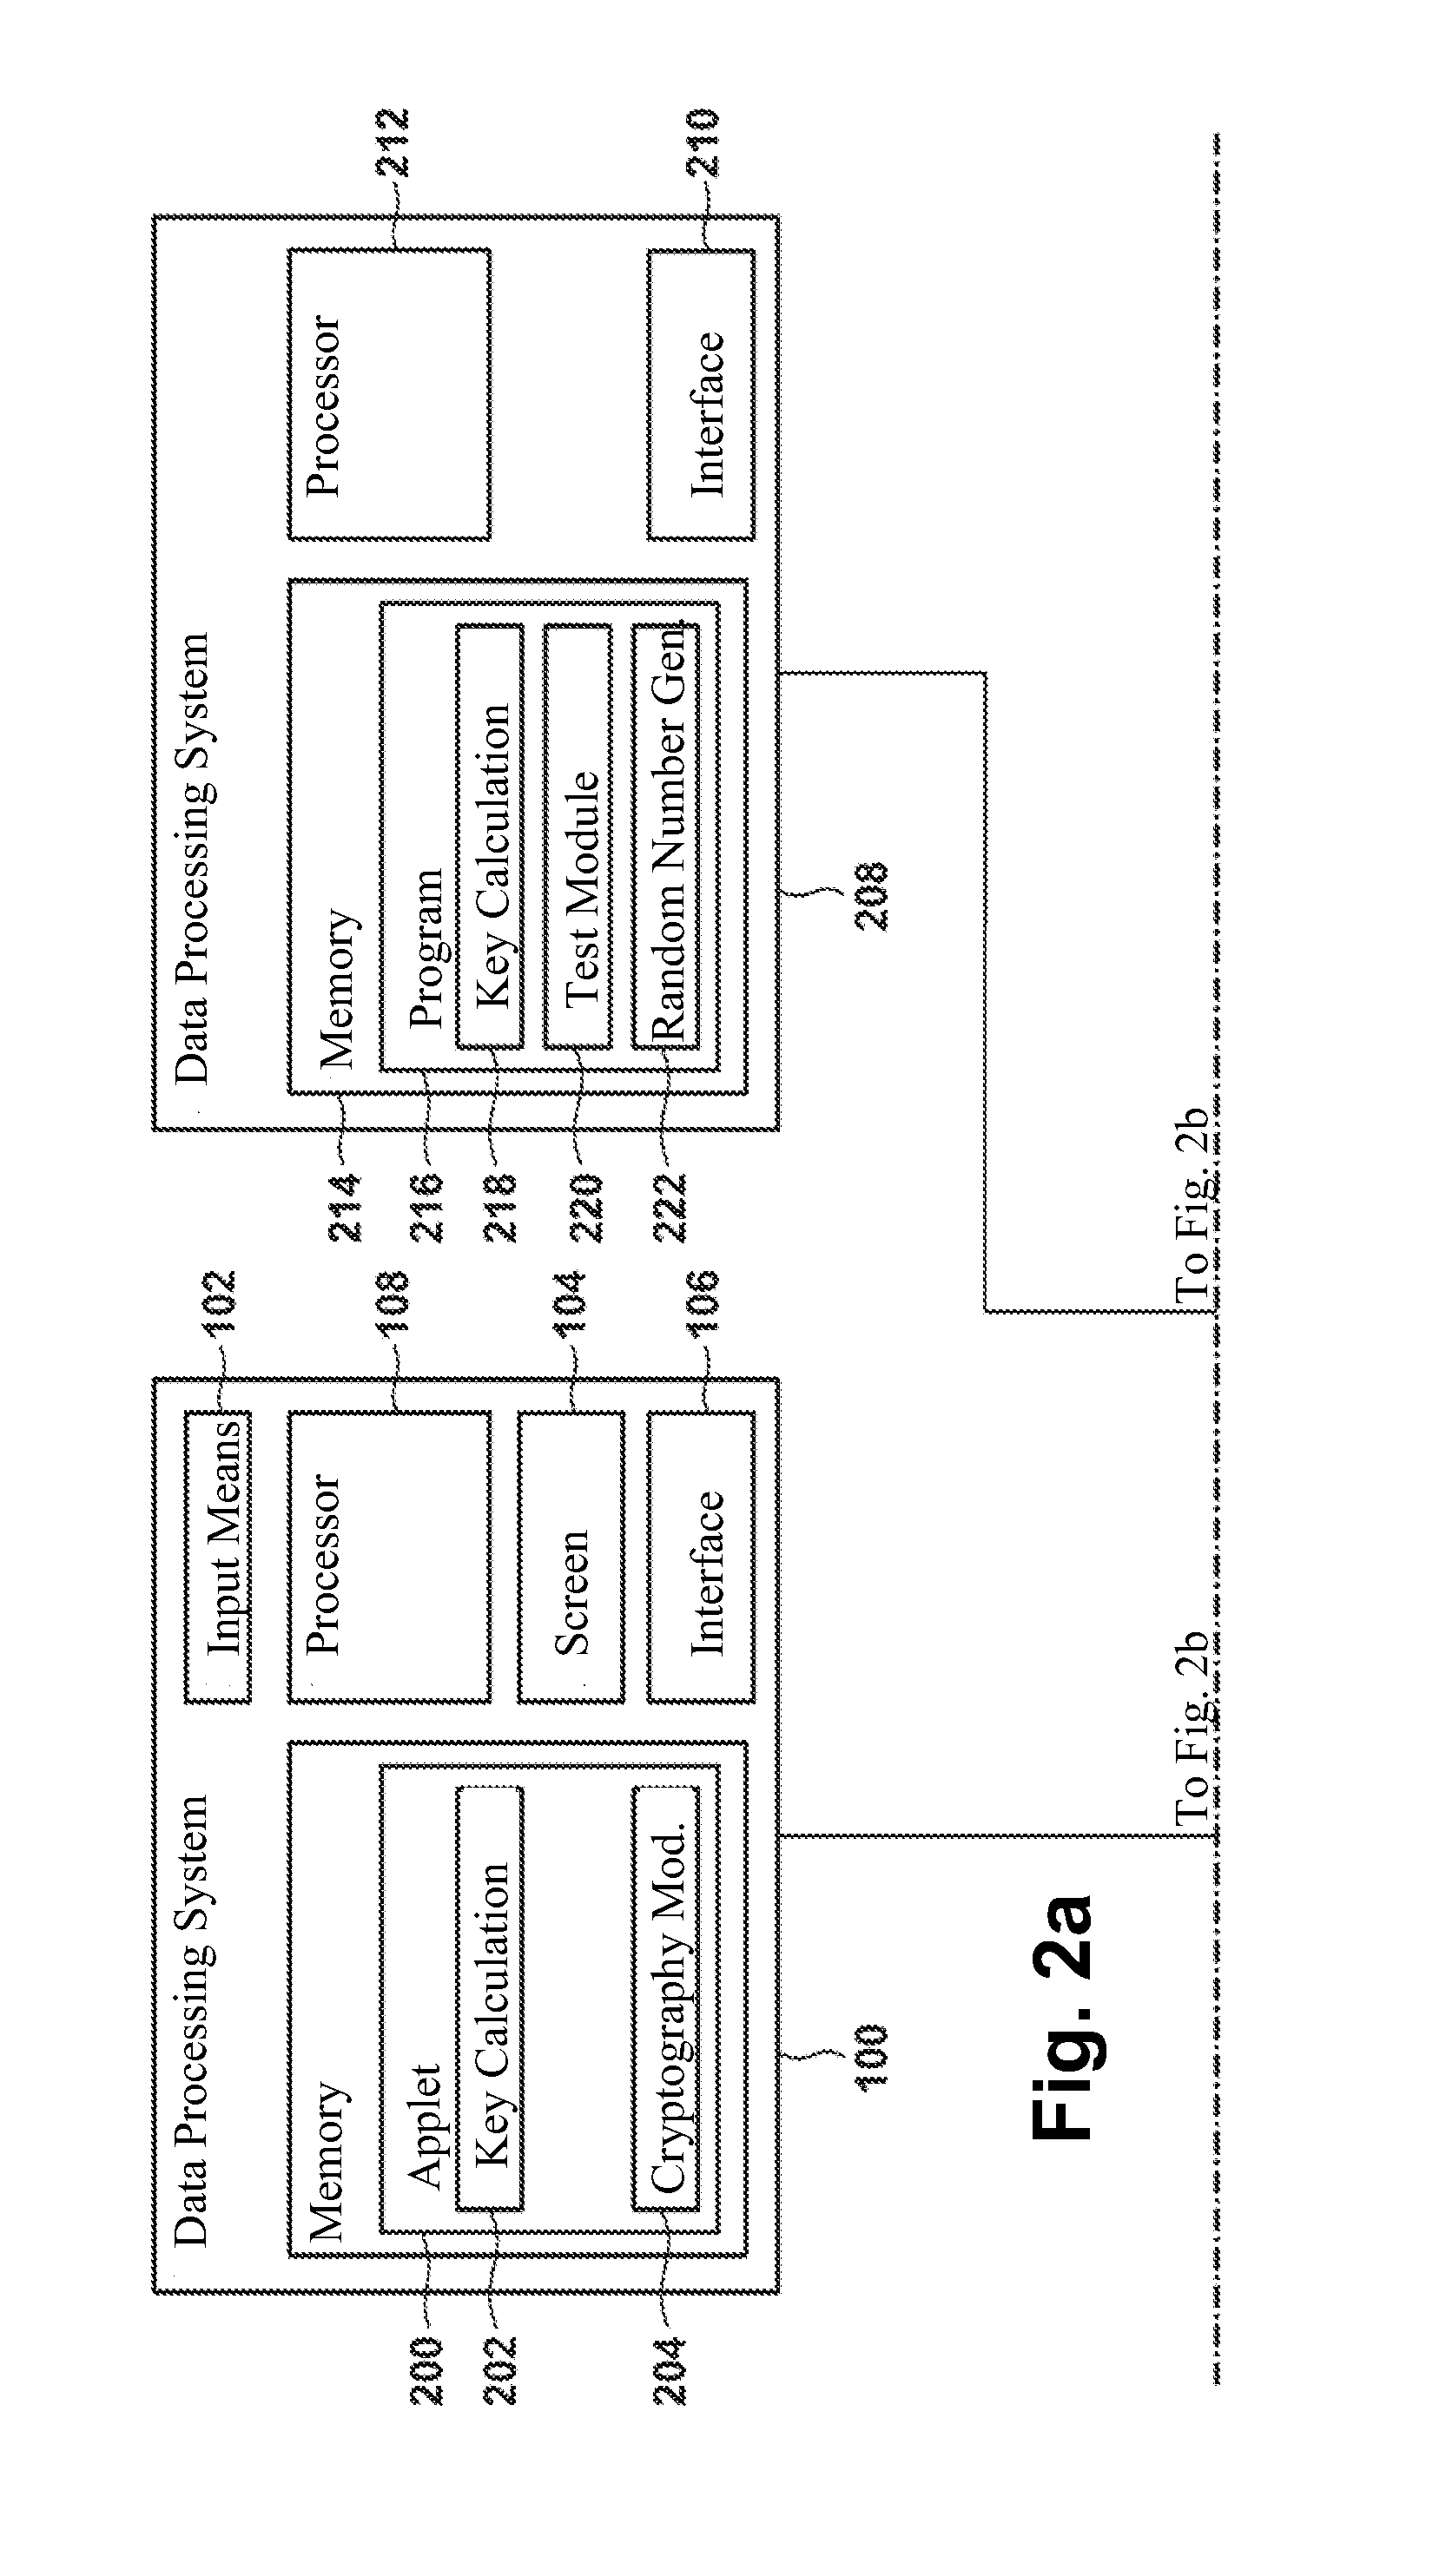 Method for generating an asymmetric cryptographic key pair and its application